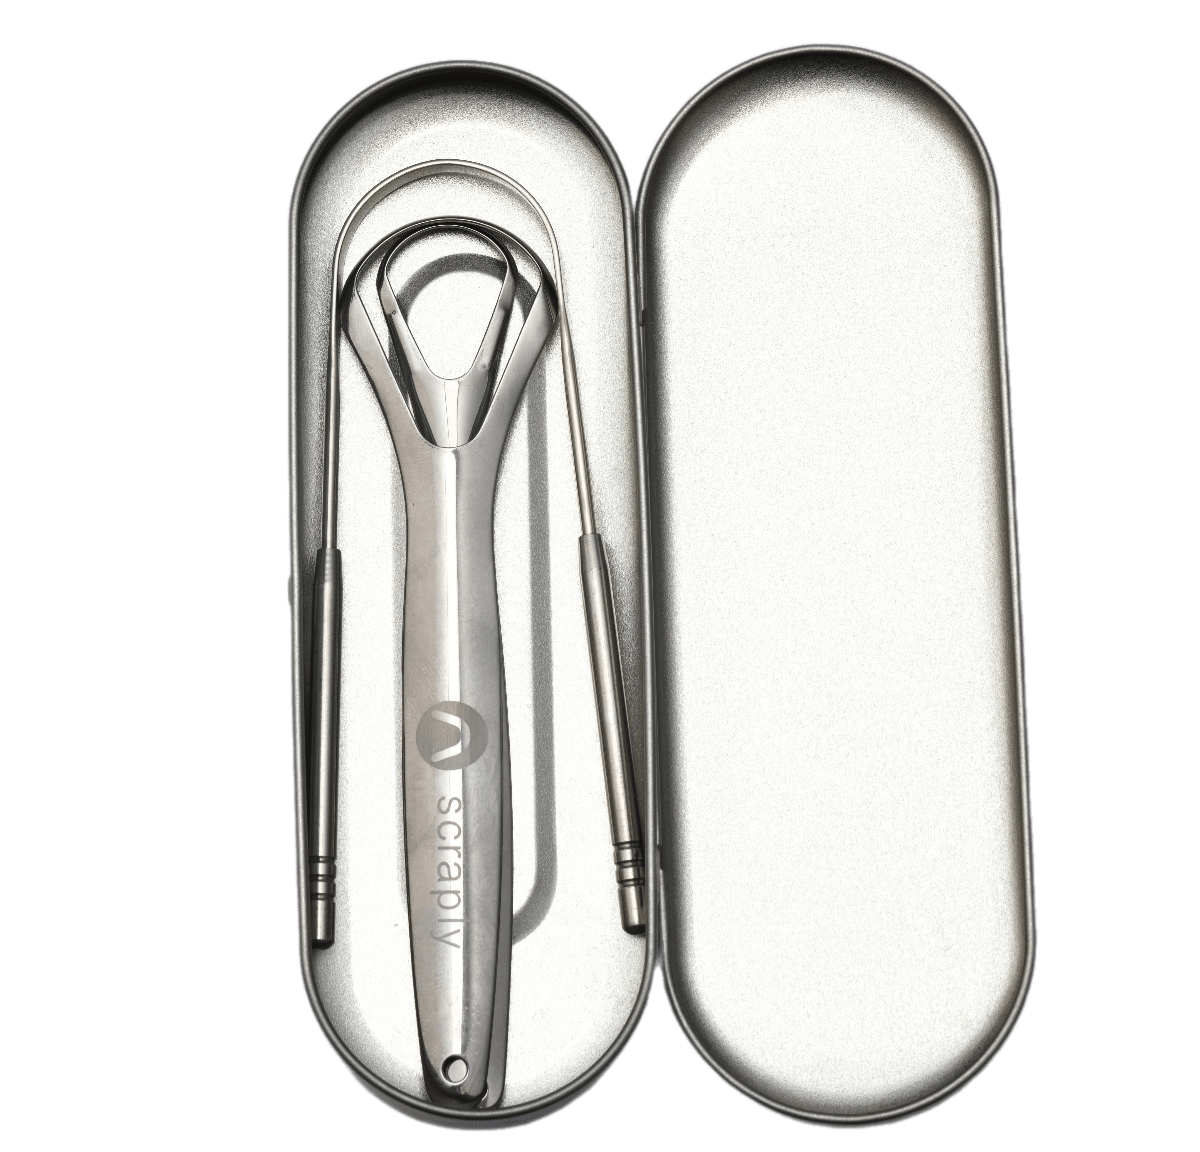 3 in 1 Stainless Steel Tongue Scrapers - ScraplyLB